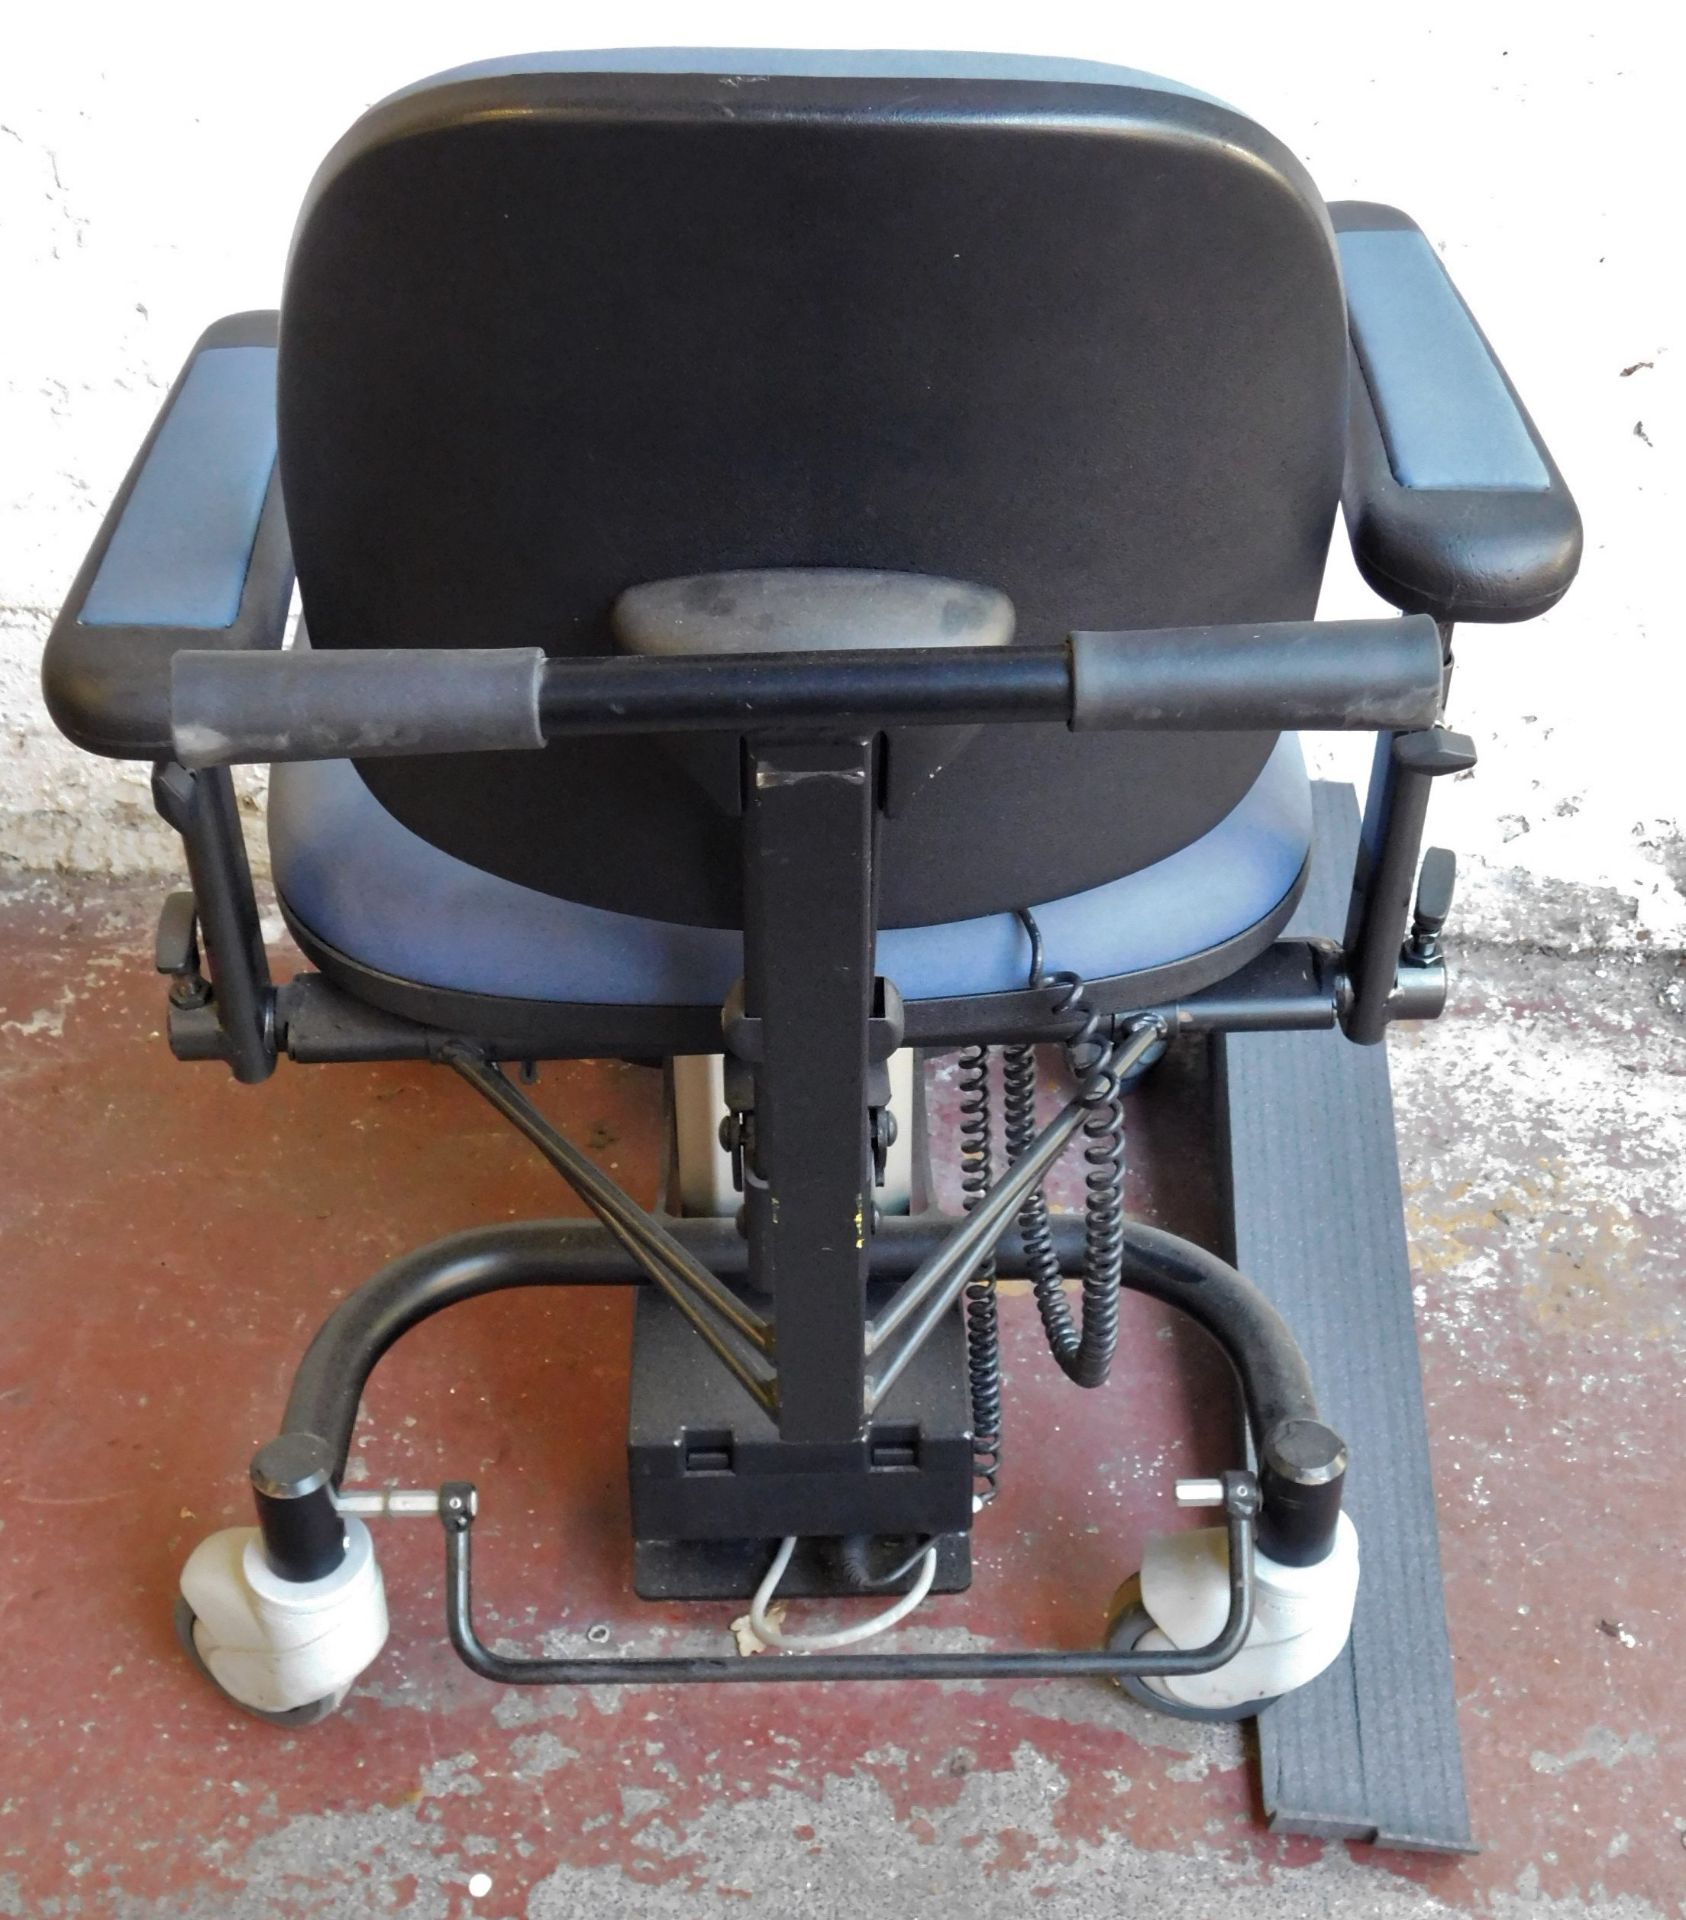 Rini HB41A00-00002 Ophthalmic Operating Chair, Serial Number 173-06 (Location: Bushey. Please - Image 2 of 4